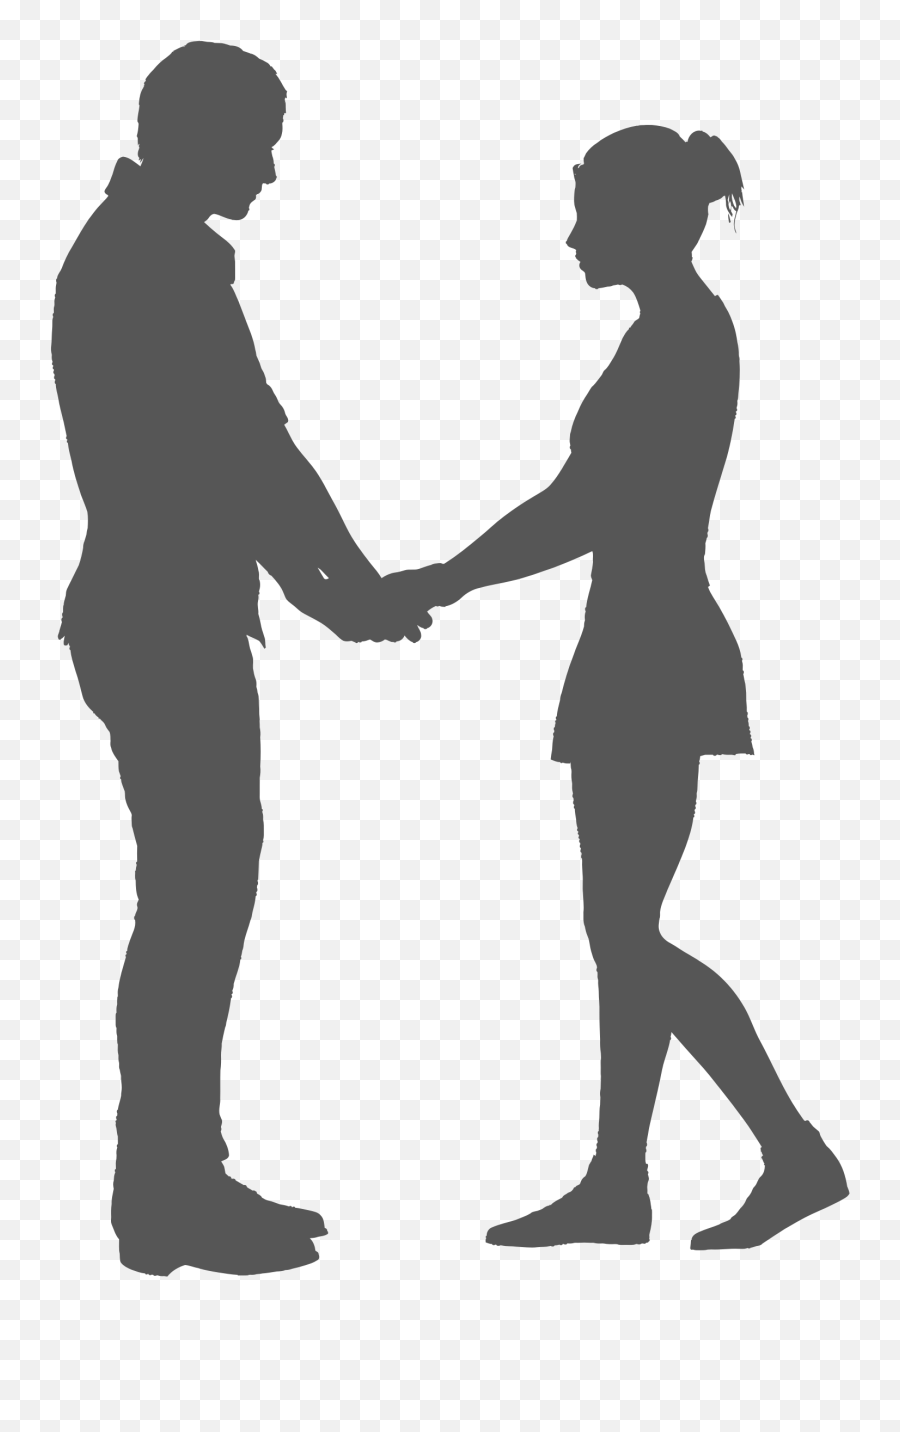 Couple Silhouette Holding Hands Png - Boy And Girl Holding Hands Silhouette Emoji,Two Men Holding Hands Emoji